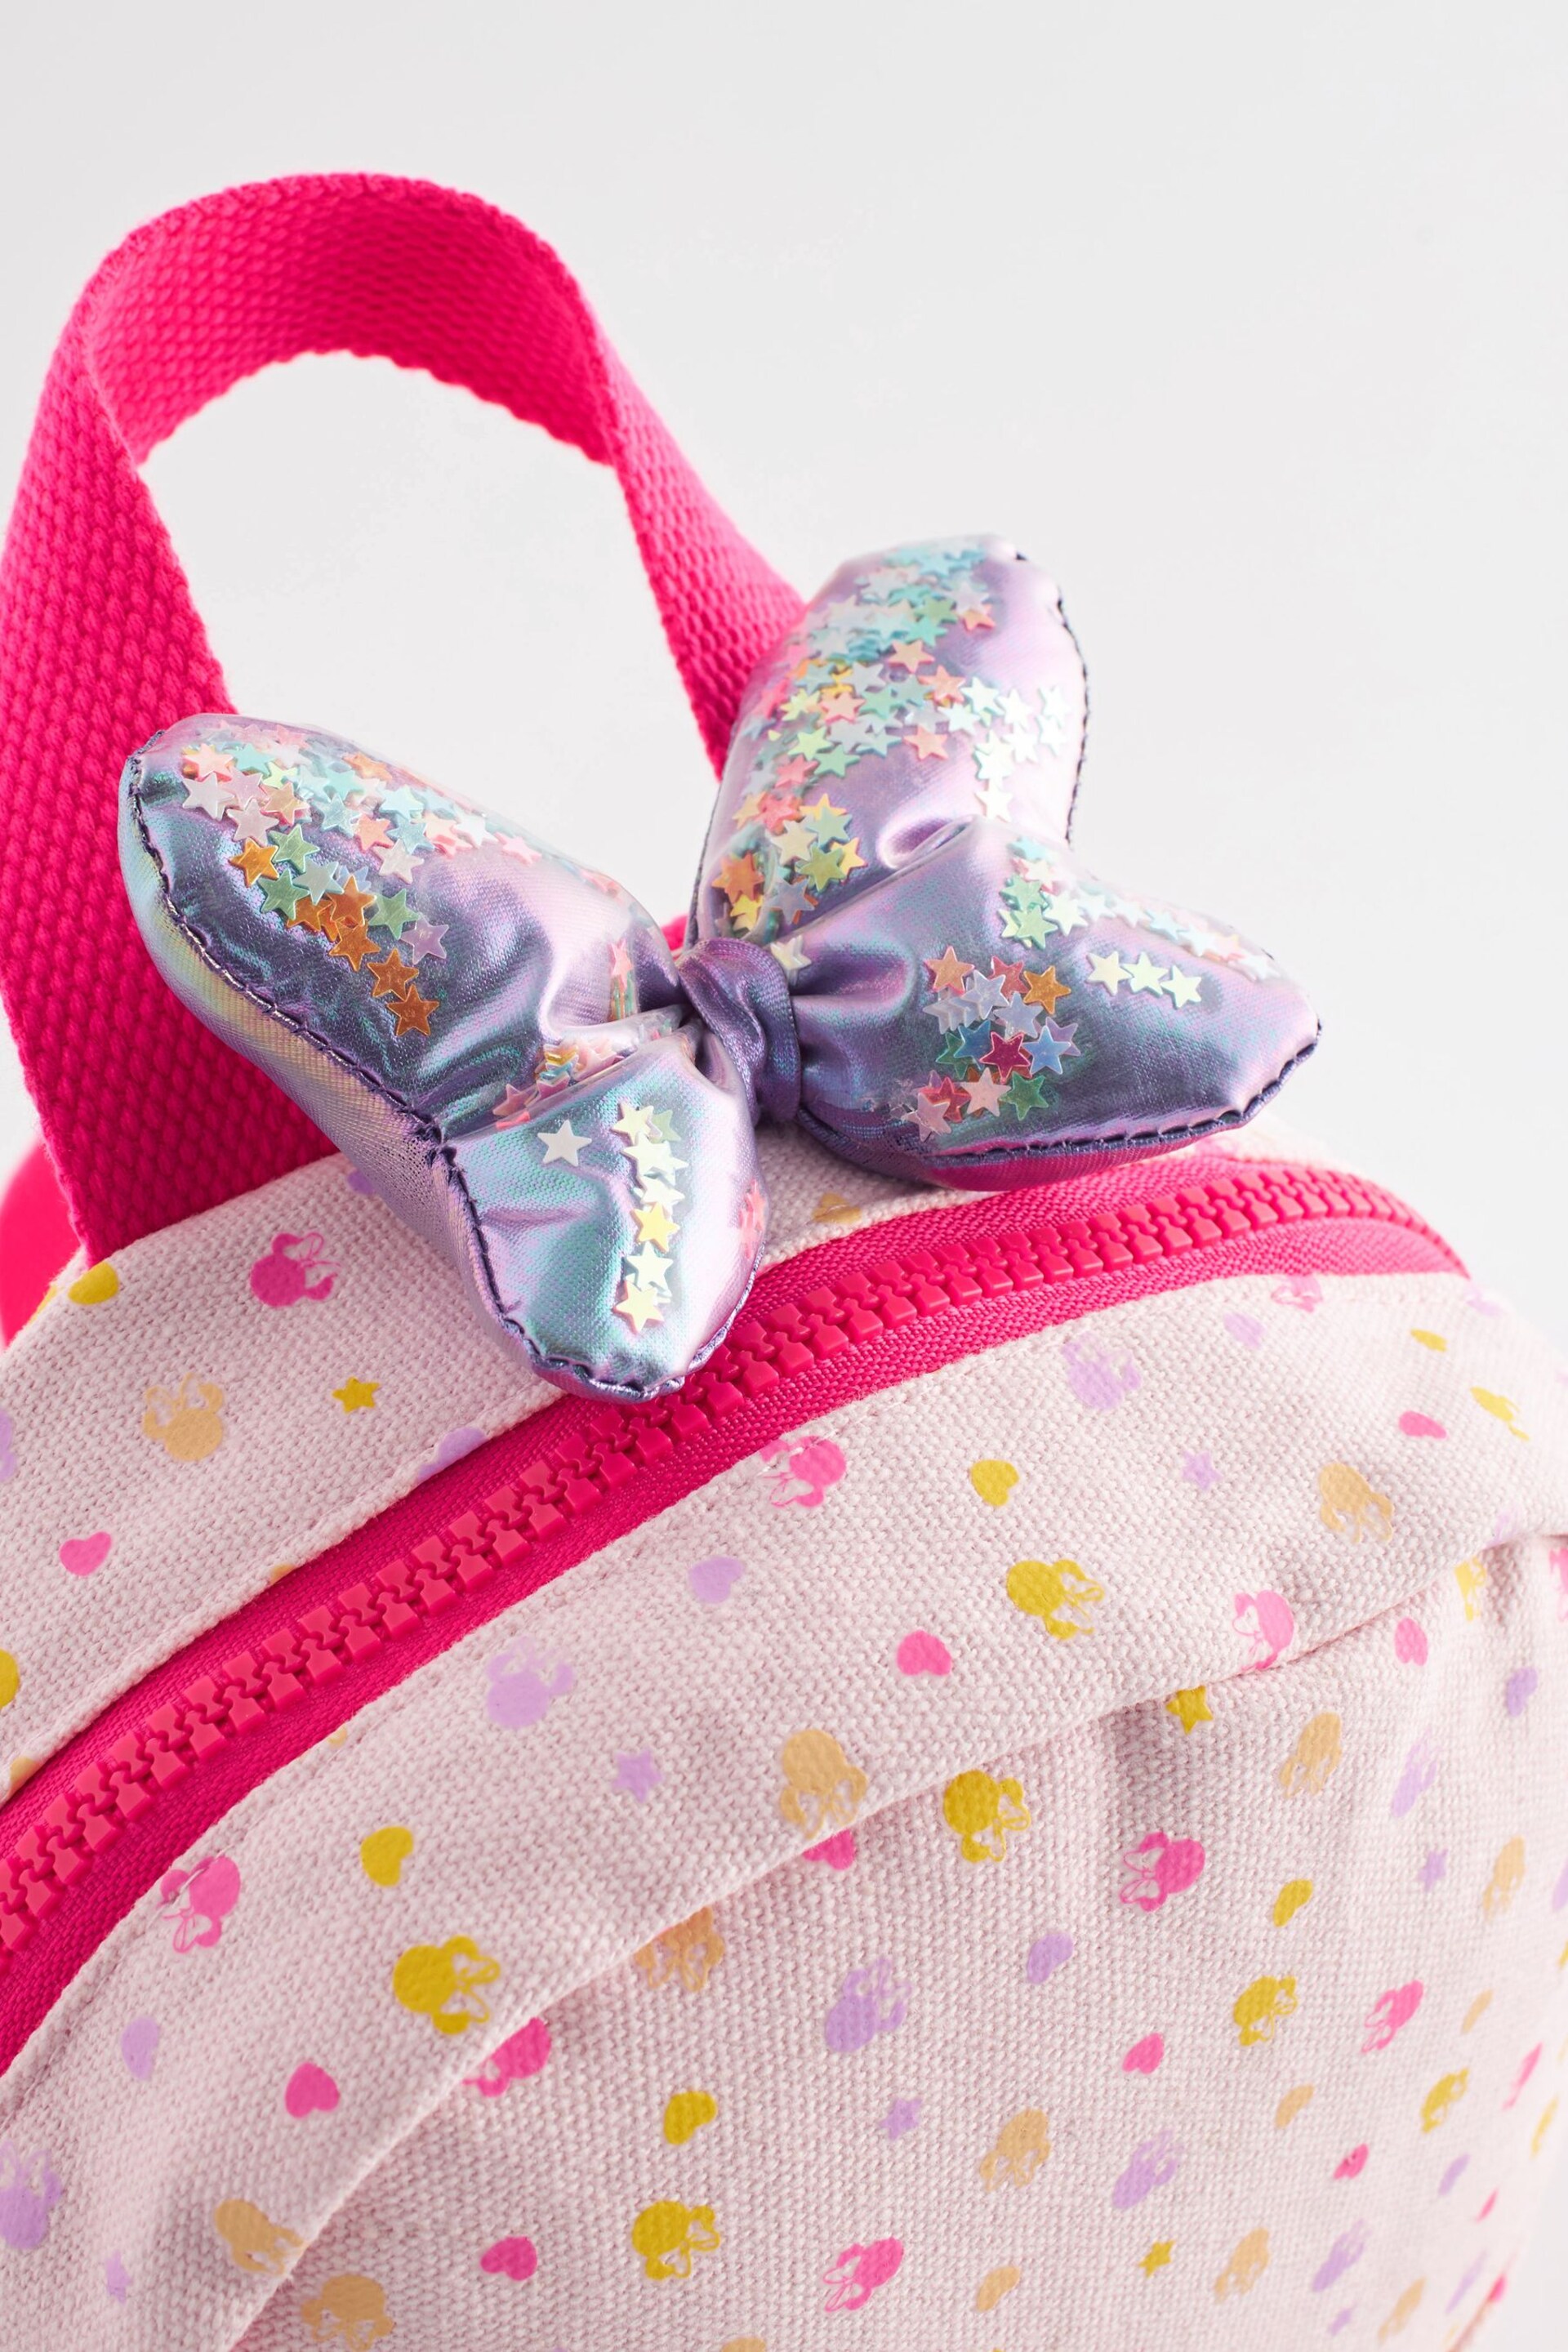 Pink Minnie Mouse Rucksack - Image 5 of 5